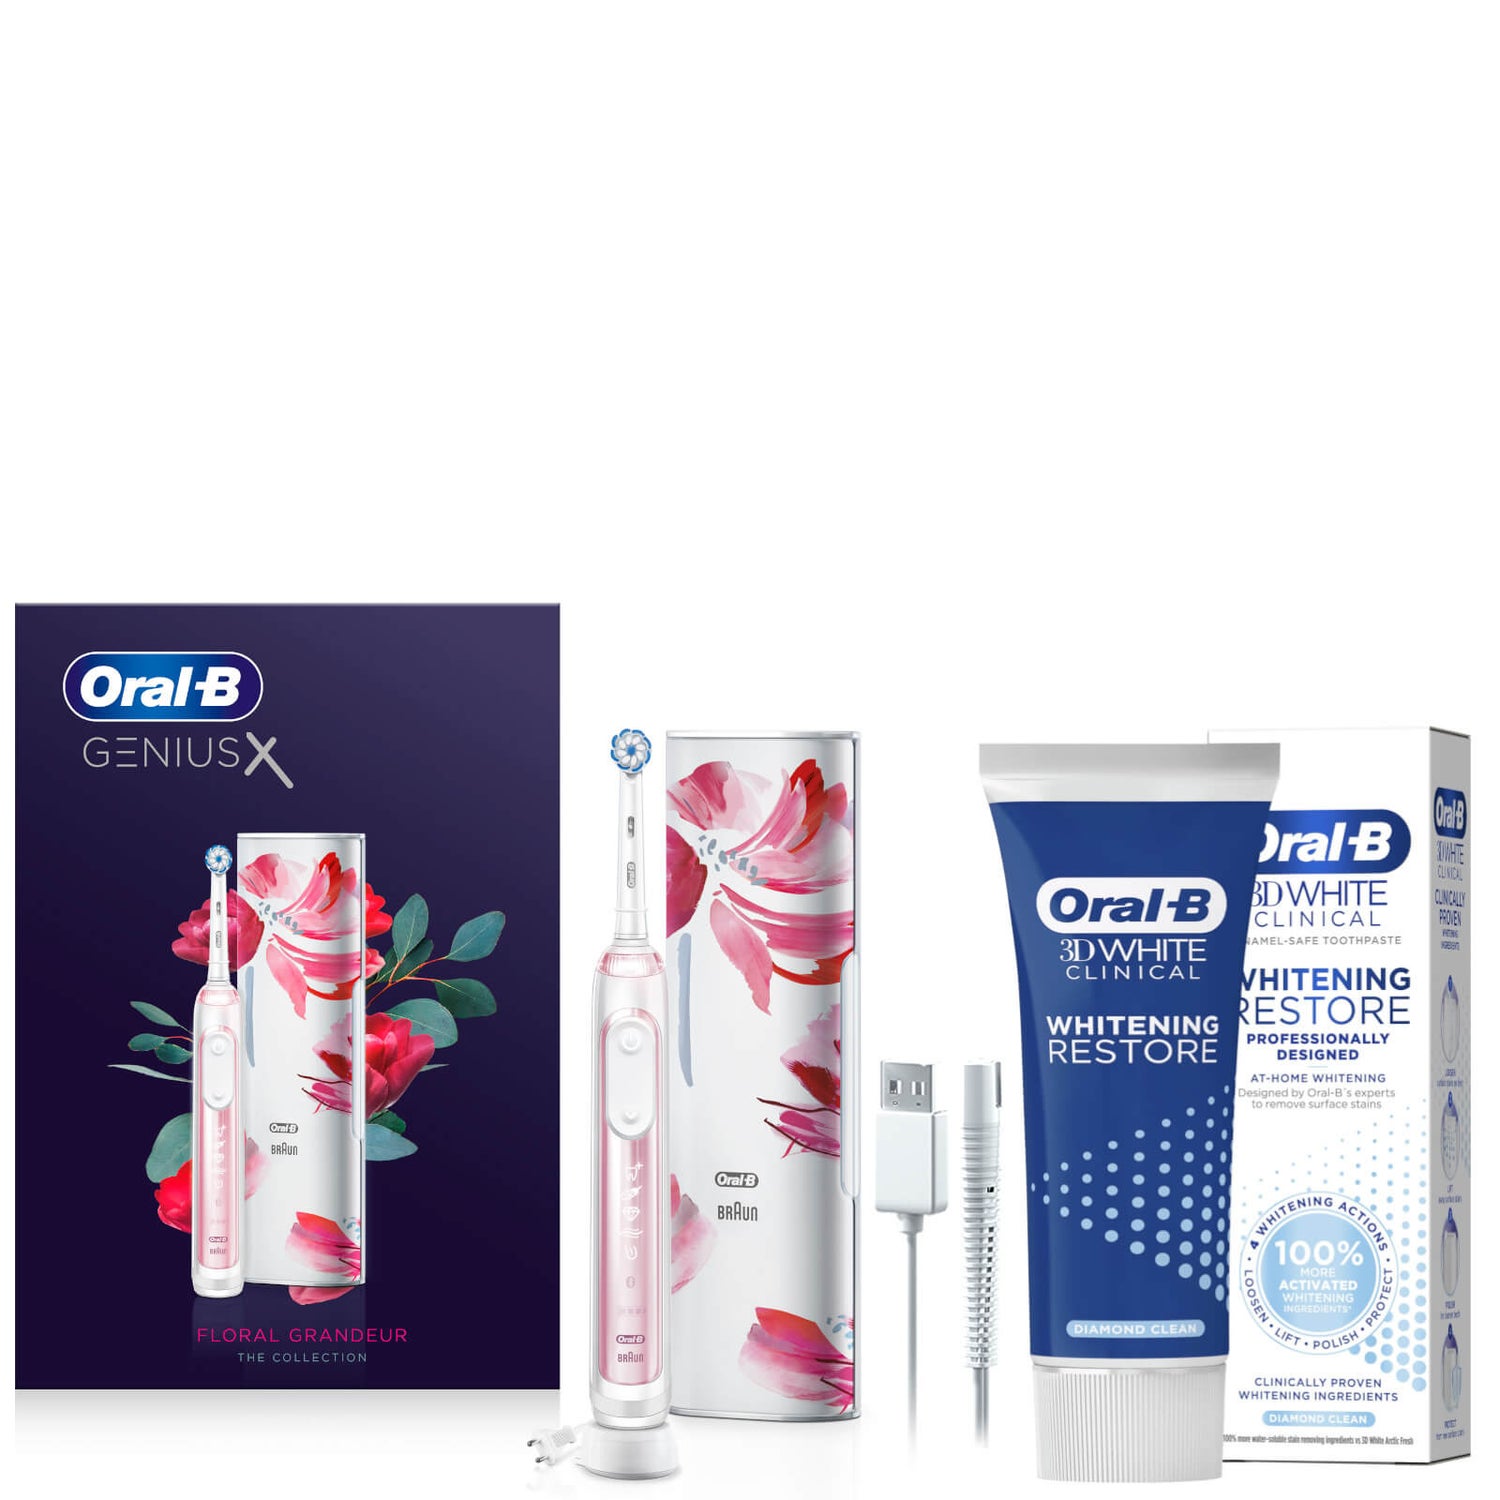 Genius X Limited Edition Electric Toothbrush Blush Pink + Free 3D White Toothpaste